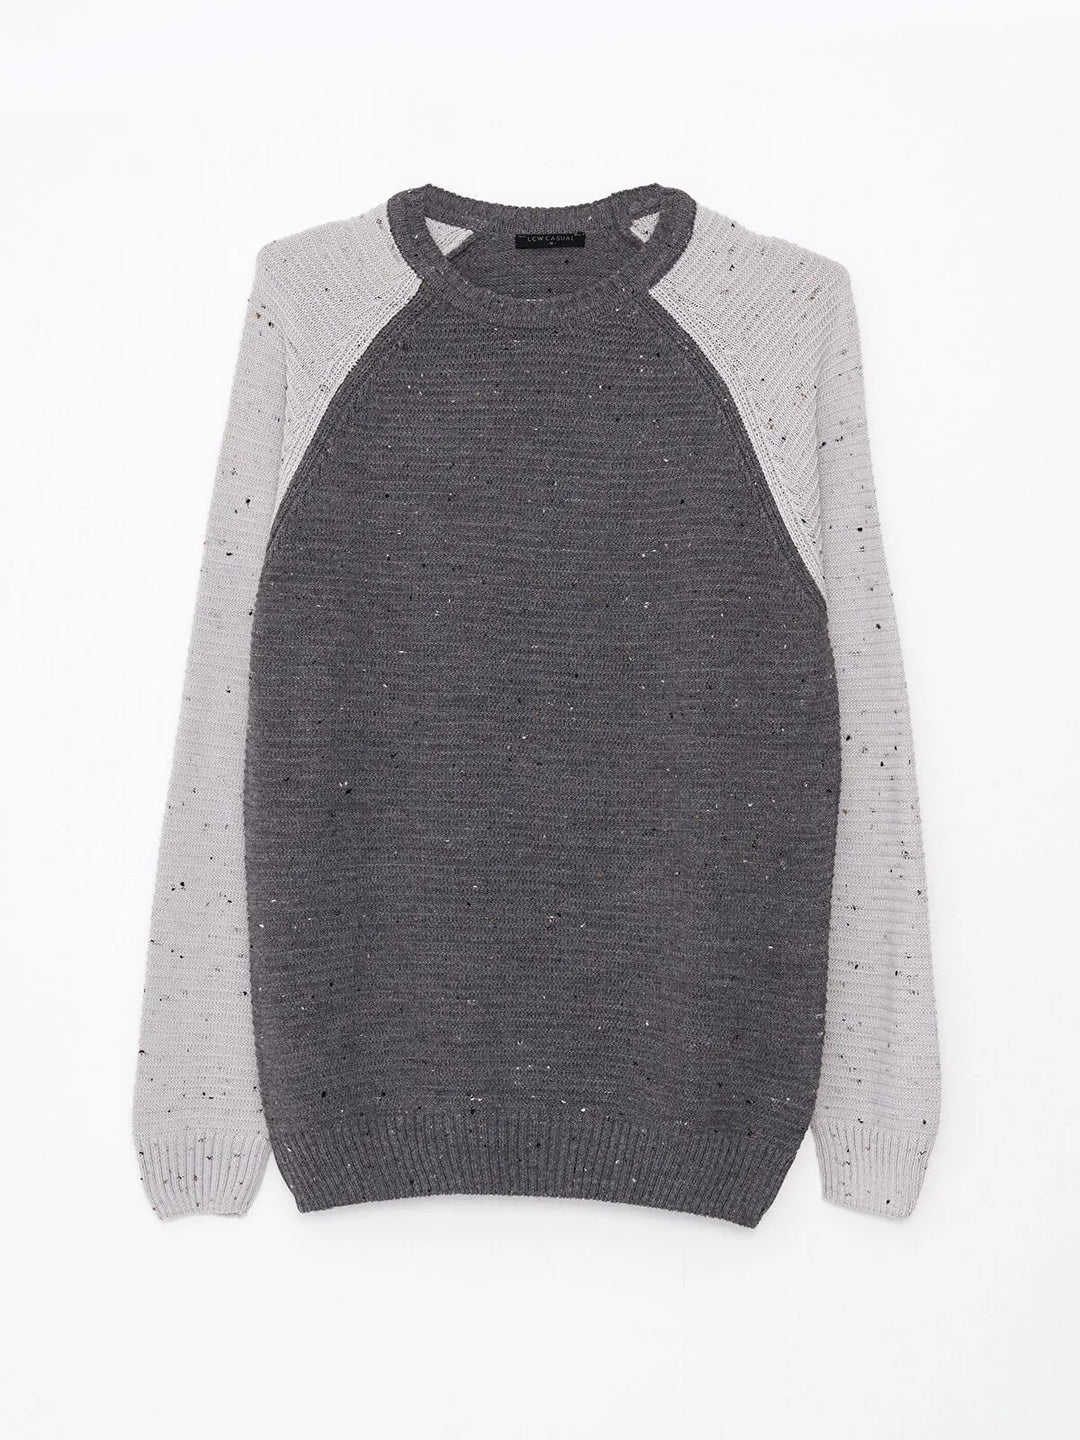 Crew Neck Long Sleeve Men Knit Sweater With Color Block